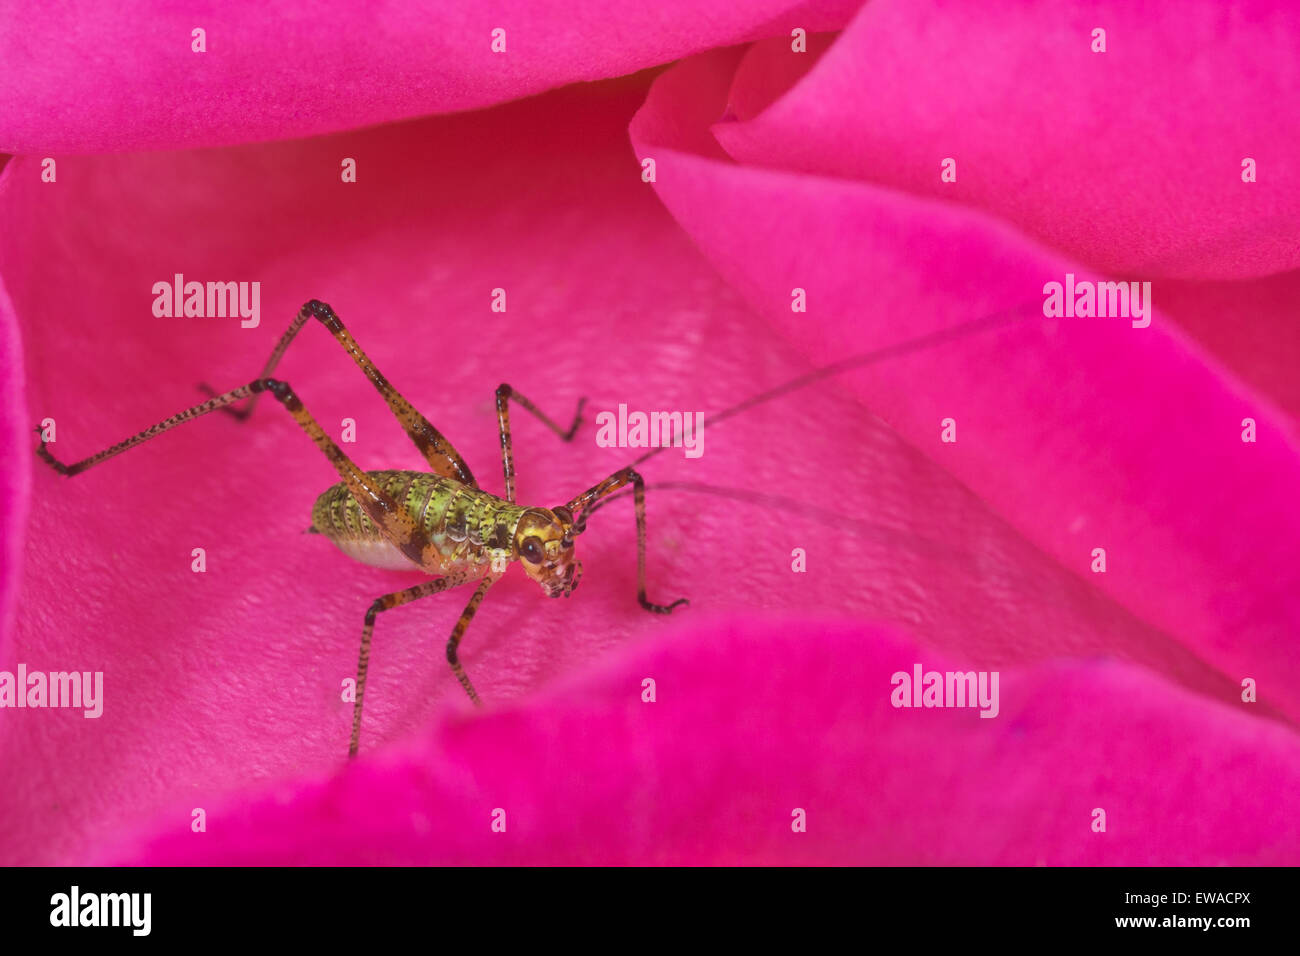 Macro. Small cricket insect, pretty in pink rose. Stock Photo